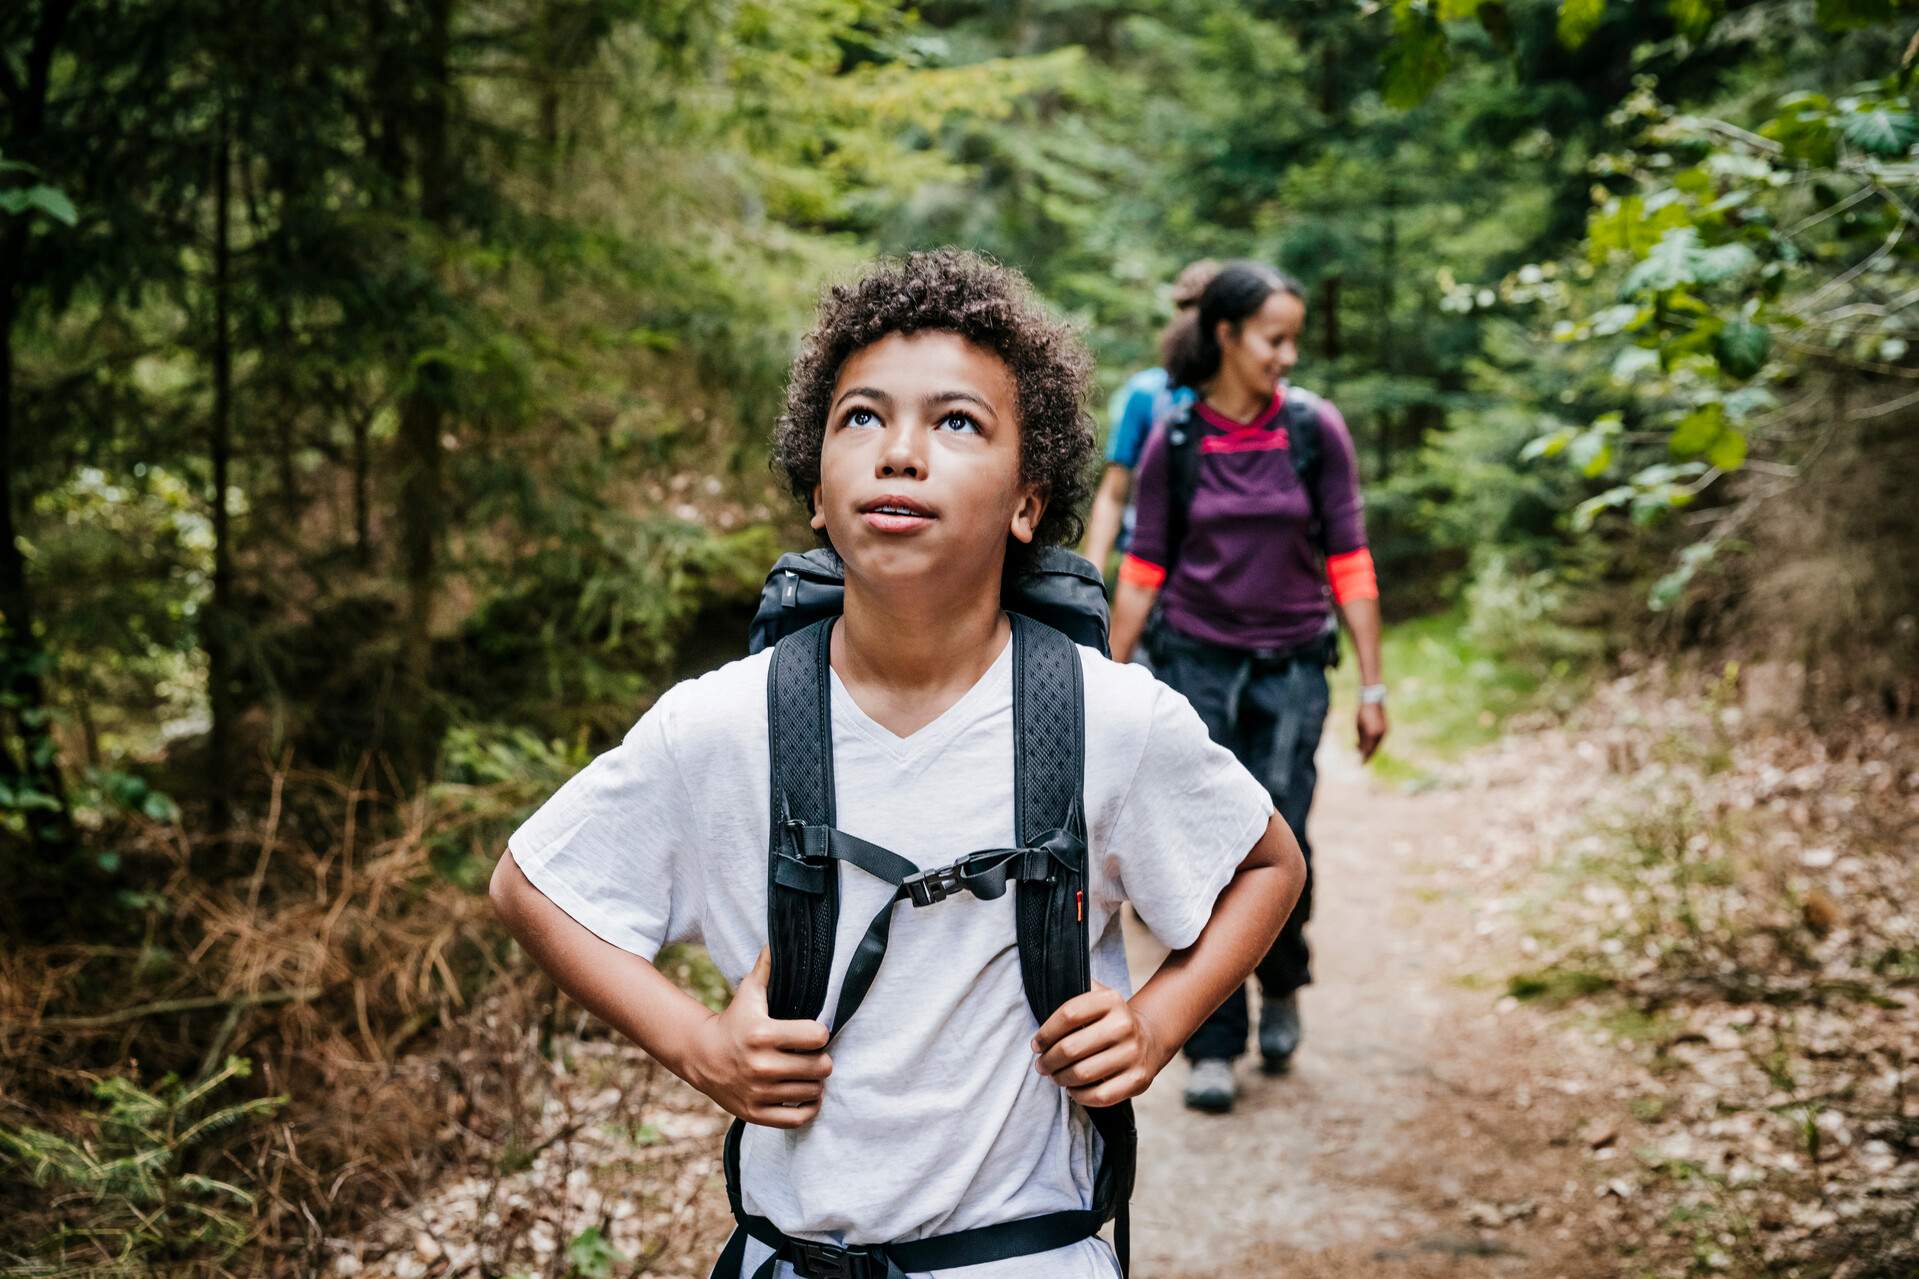 Young kid in white shirt carry a bag and looks up while hiking in the forest with people following behind him.